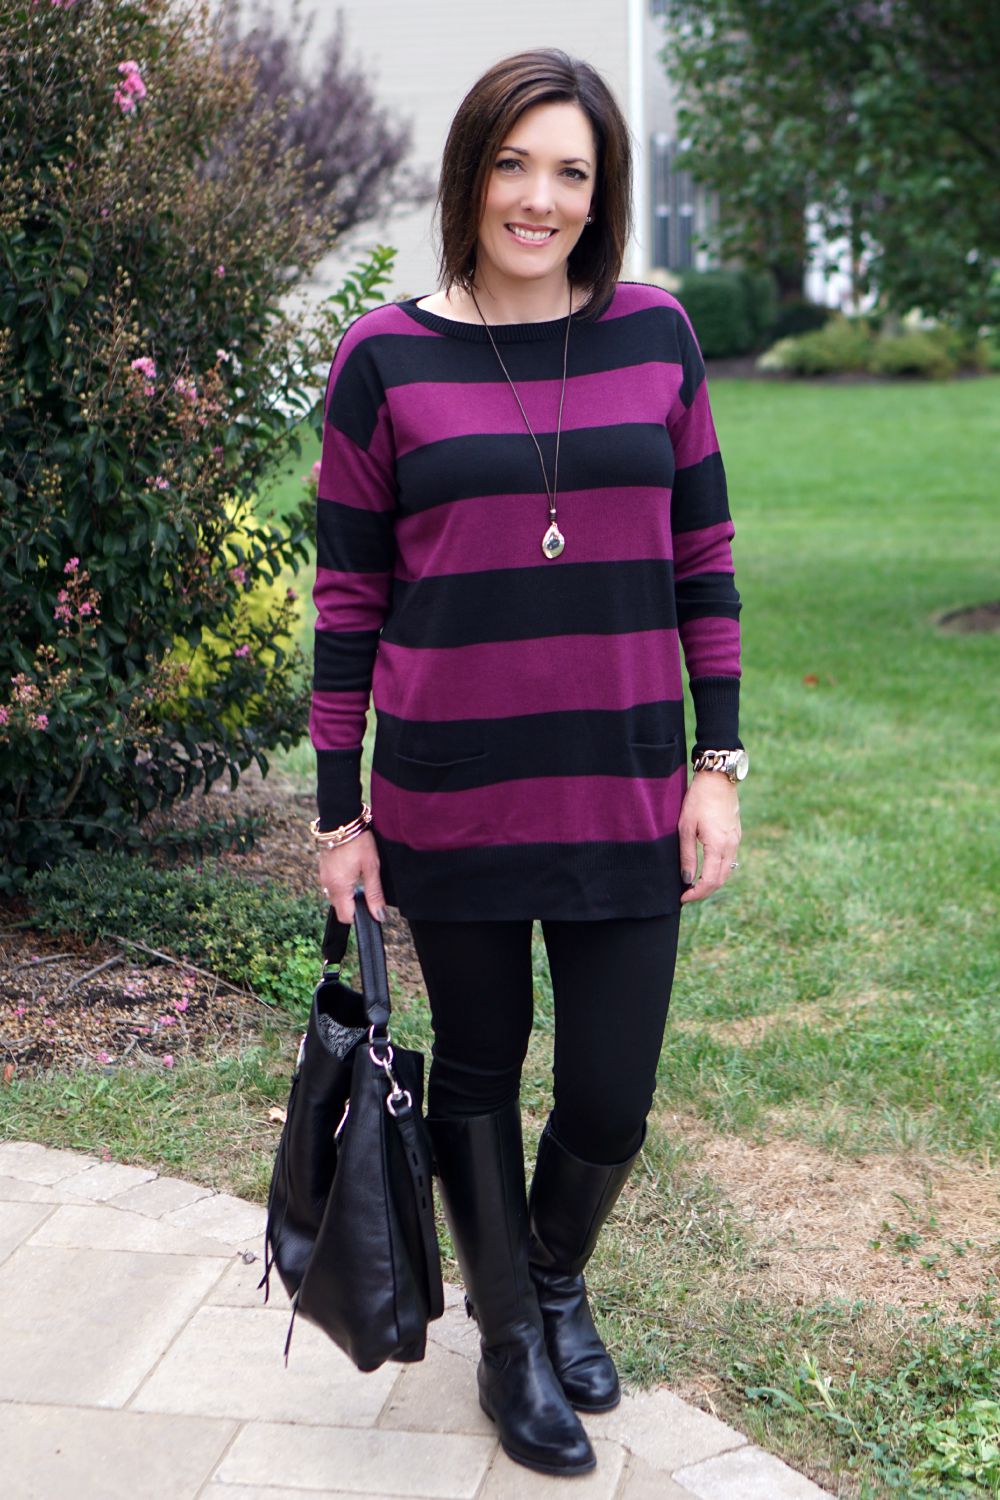 Fashion Advice for Women Over 40: How to Wear Leggings with a Tunic Sweater